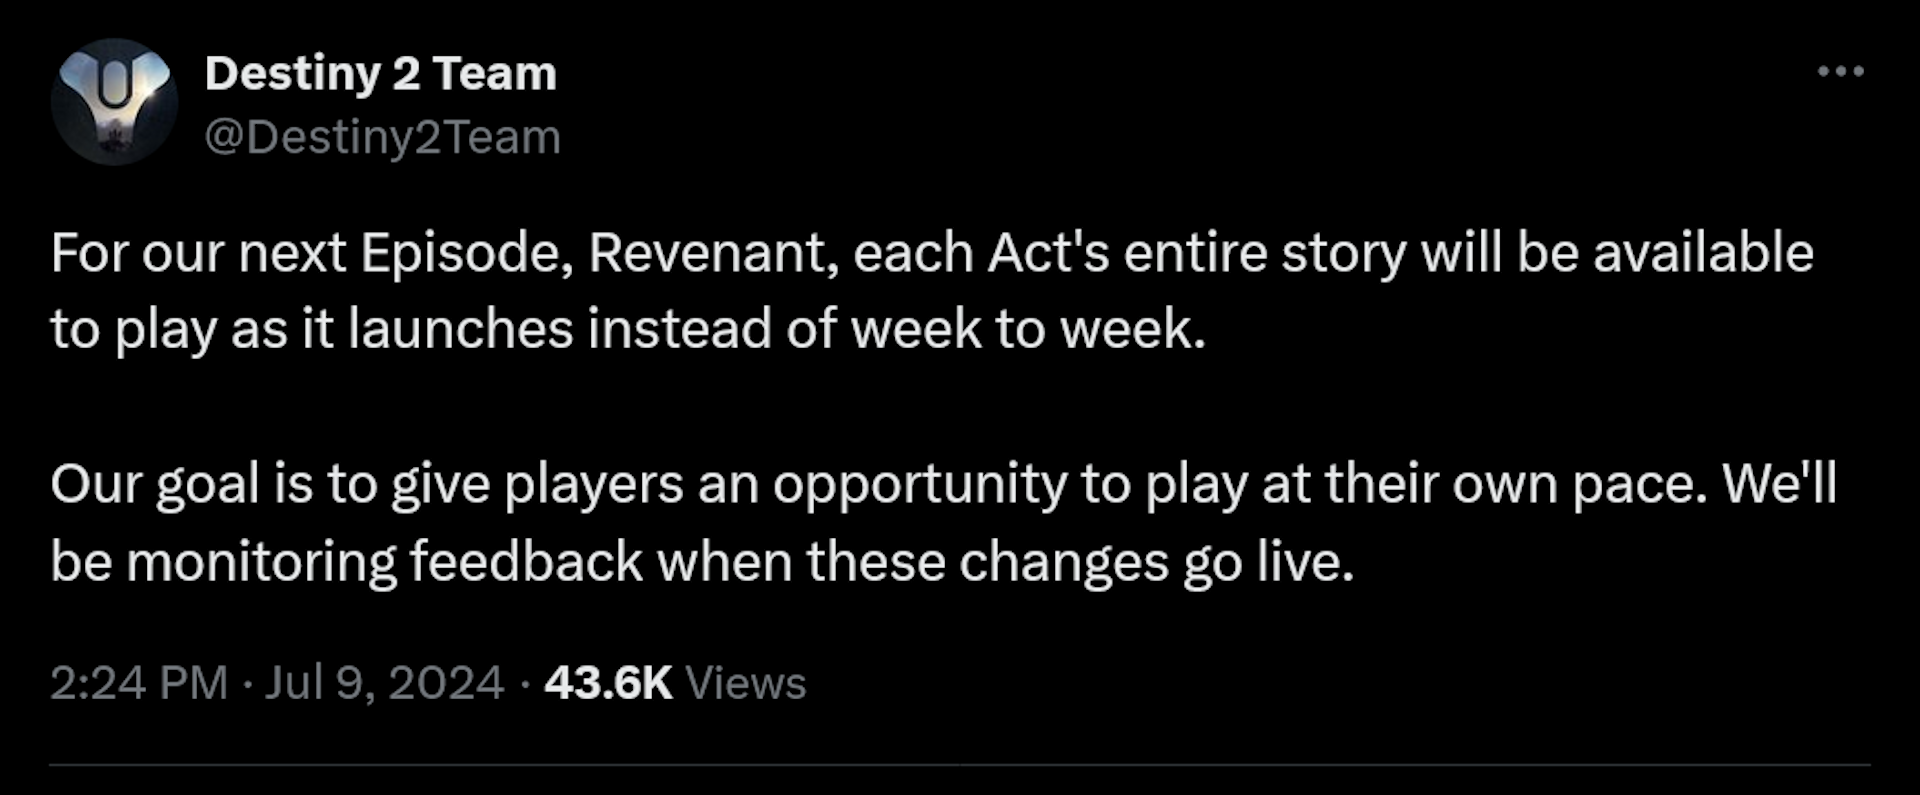 For our next Episode, Revenant, each Act's entire story will be available to play as it launches instead of week to week.  Our goal is to give players an opportunity to play at their own pace. We'll be monitoring feedback when these changes go live.